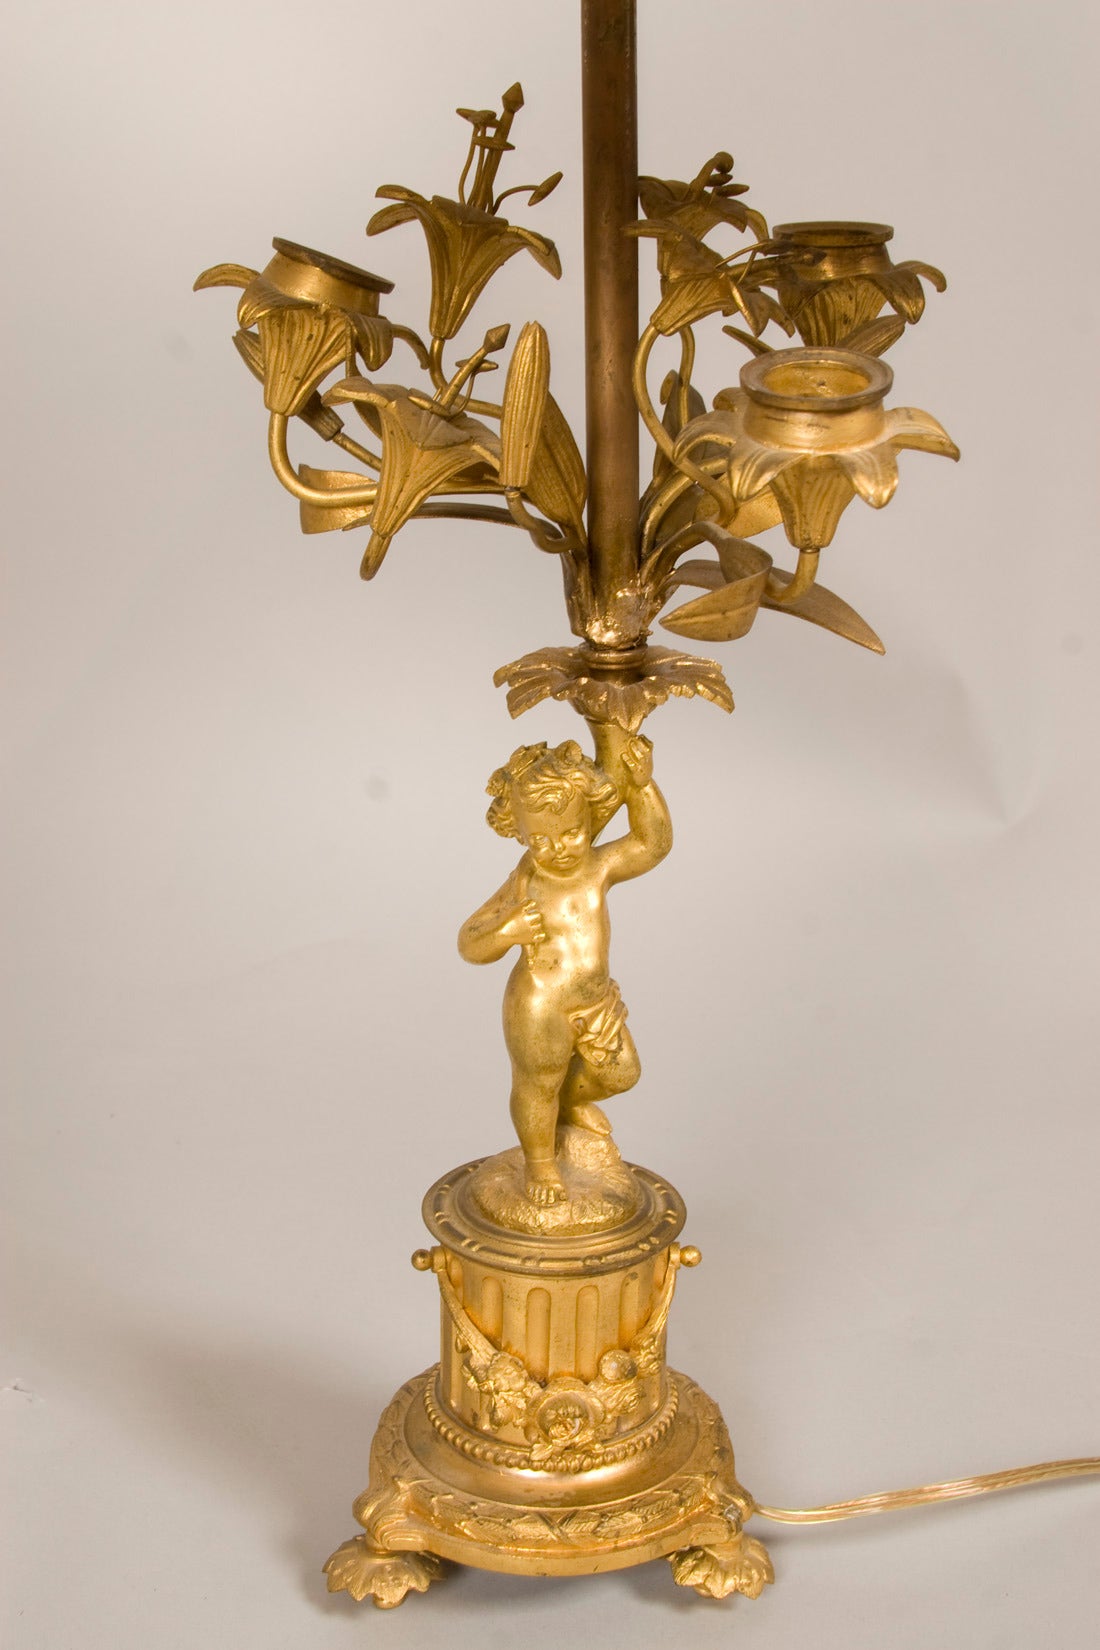 Gilt bronze lamp with cherubs and floral motifs. Candleholder converted into lamp.
Shade size: 15